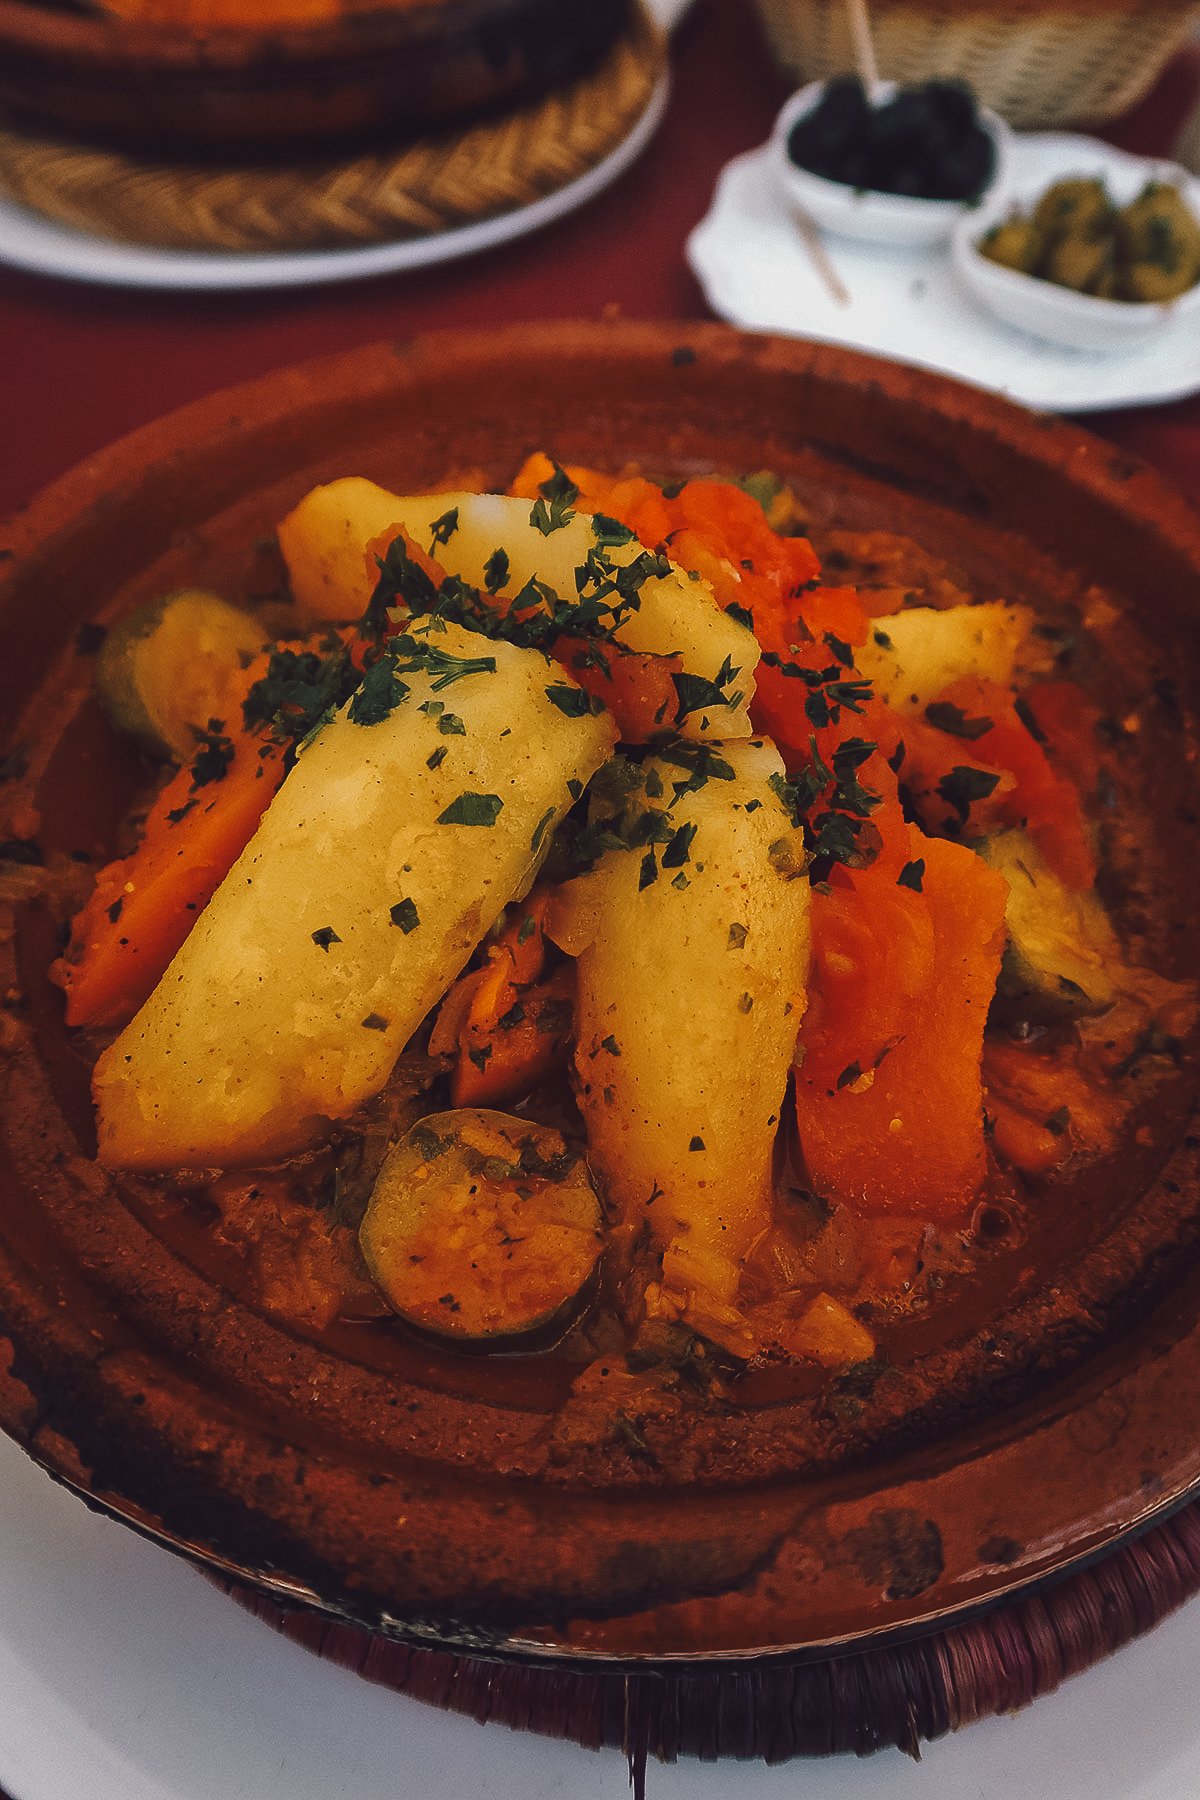 Vegetable tagine at a restaurant in Essaouira